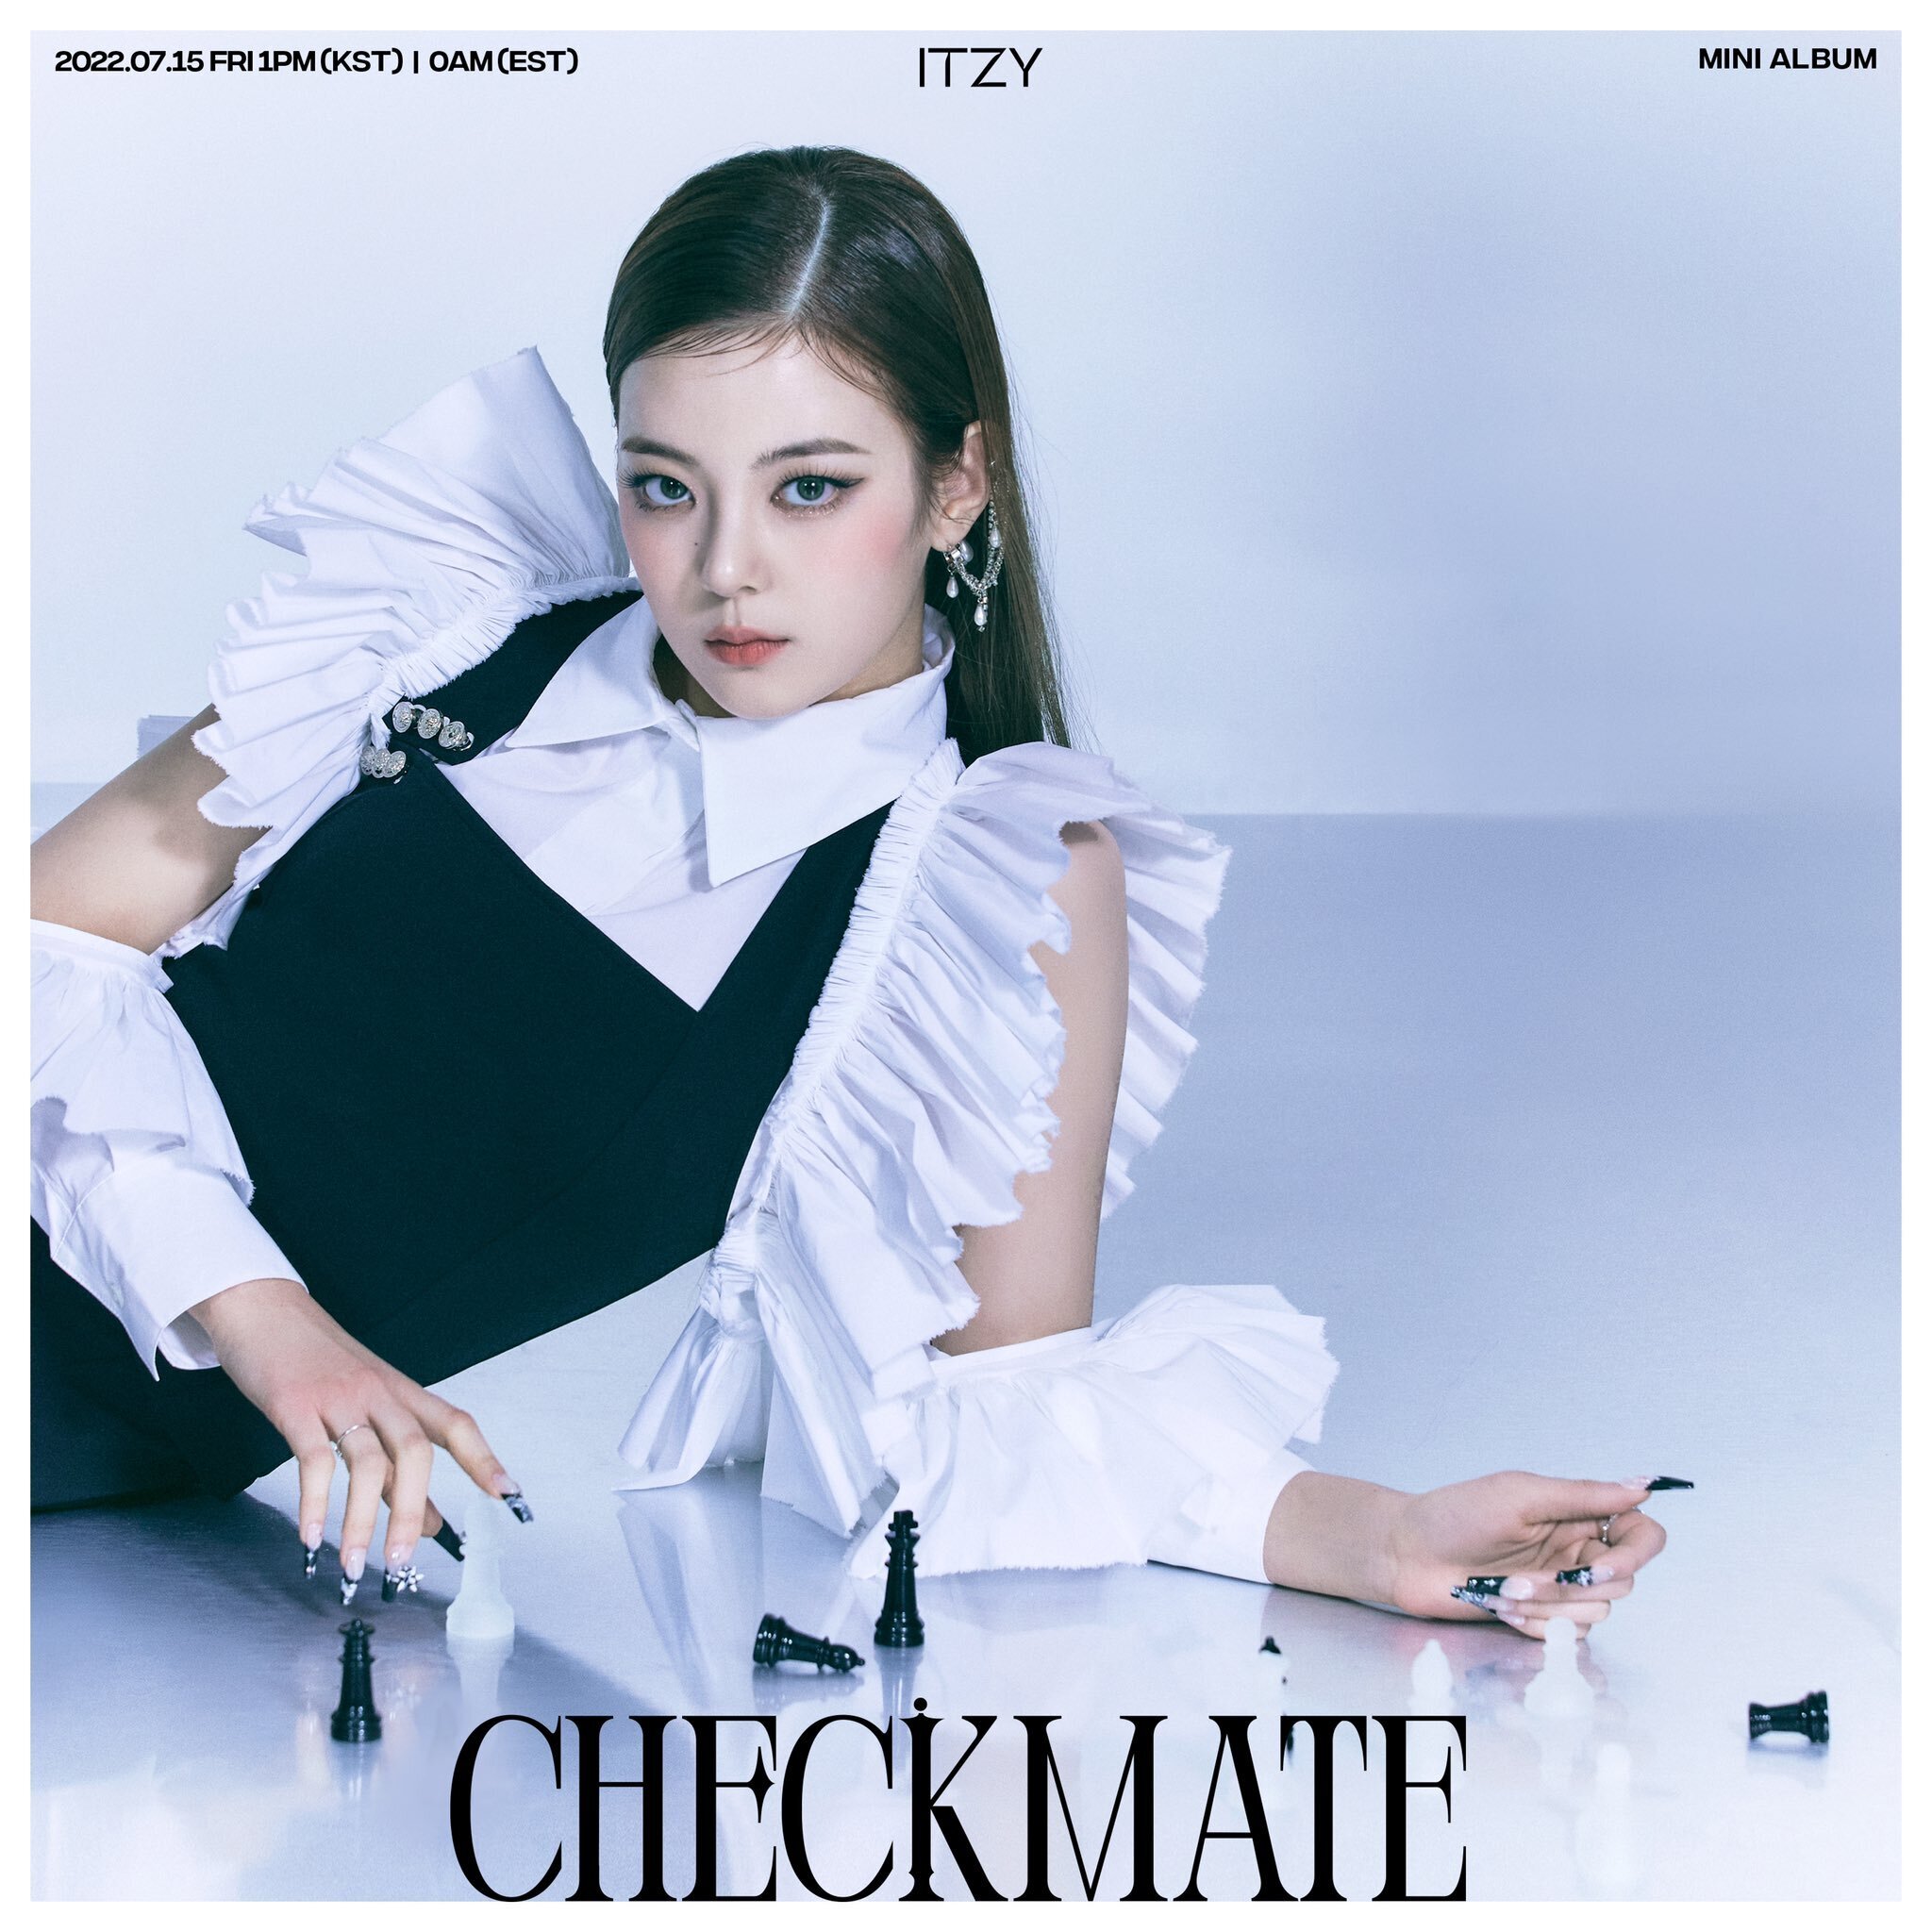 Itzy's mini album 'Checkmate' describes the battle of being true